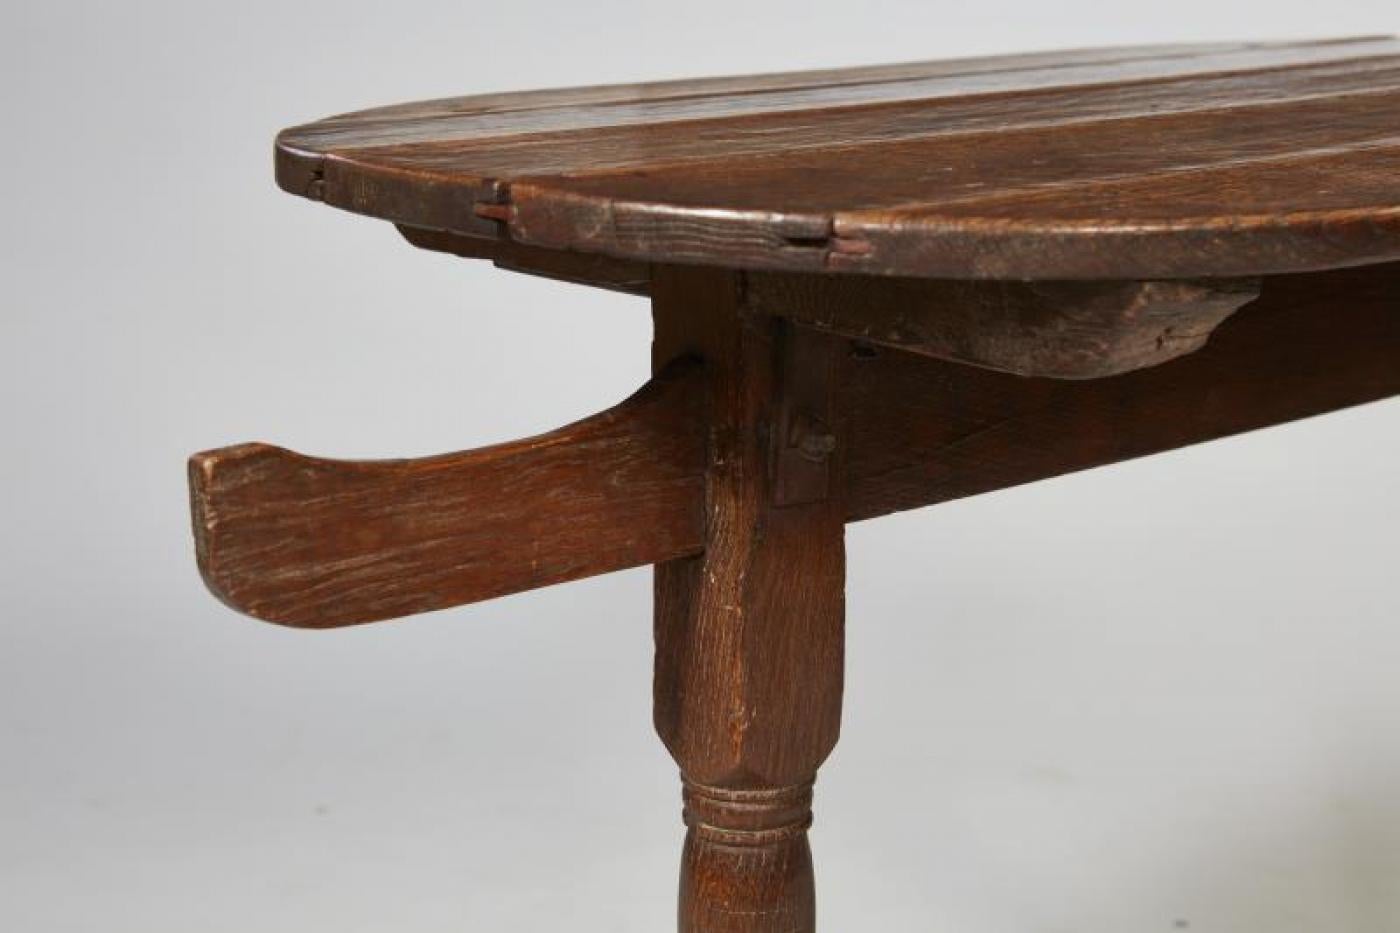 Good 17th century Flemish oak oval hunt or tavern table having unusual hook ends over turned legs joined by shoe feet, the whole possessing mellow silvery brown patina.

Width listed below is overall (including hangers) actual length of top 33